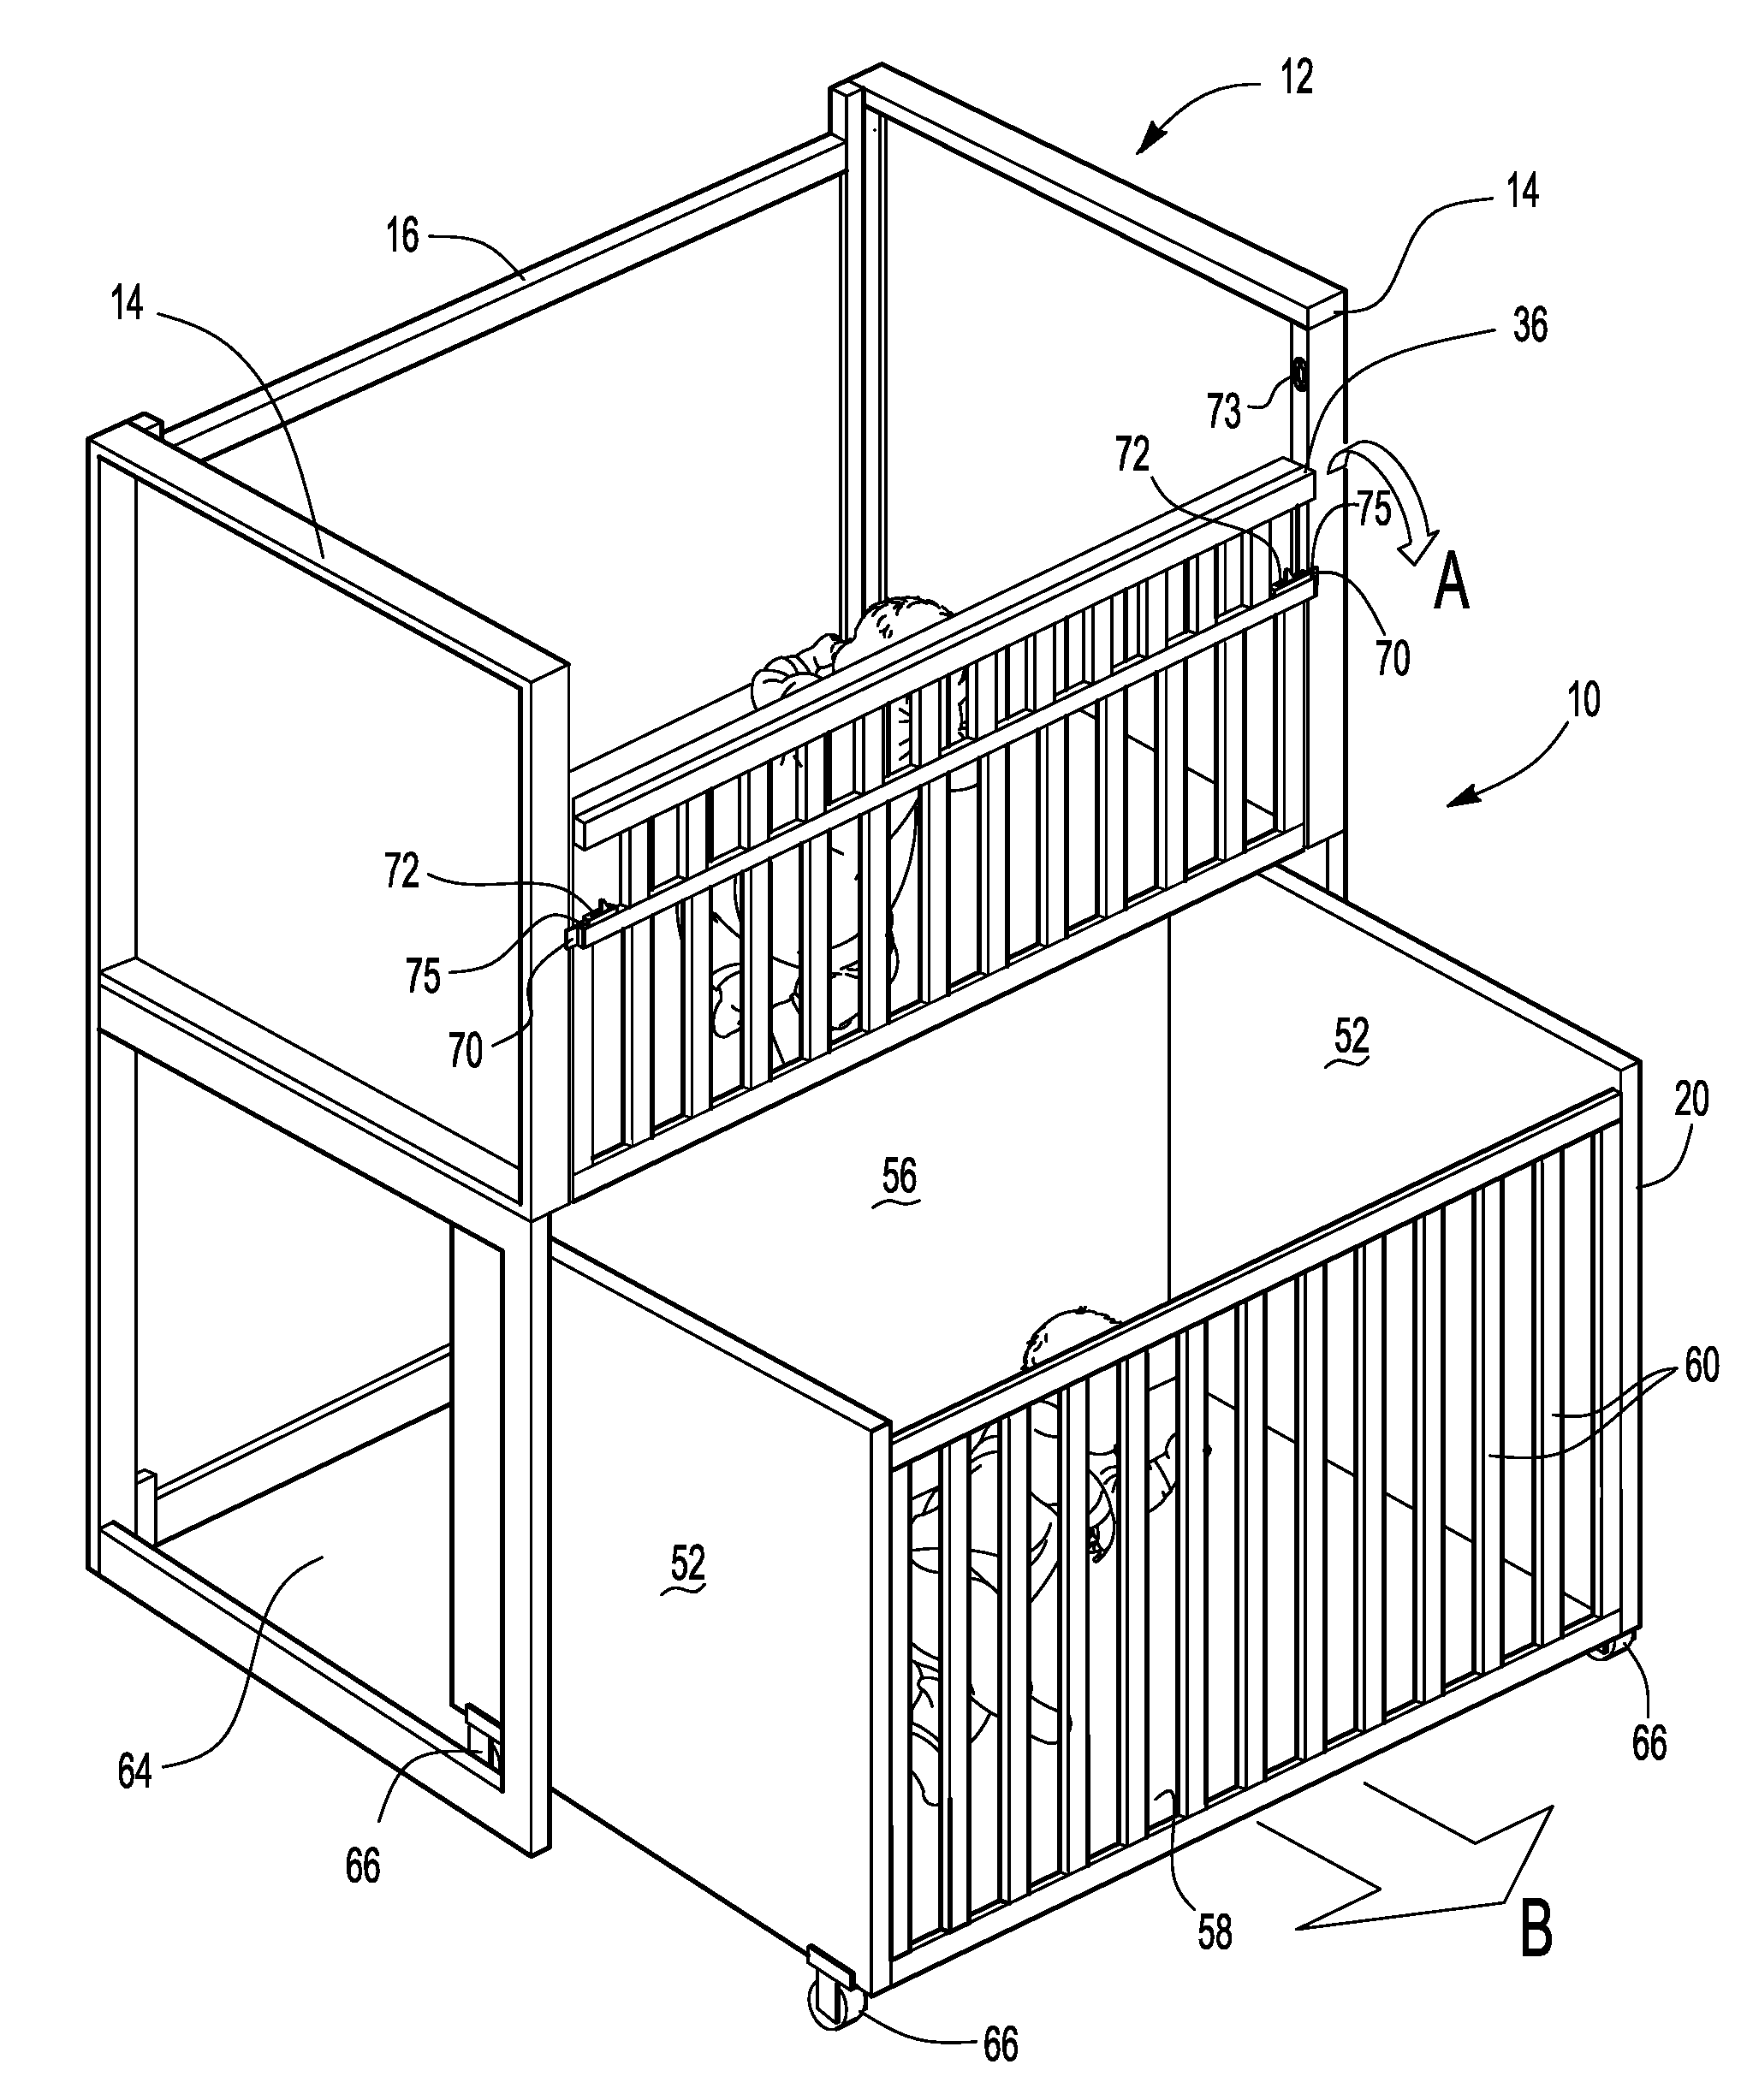 Crib set with stationary and moveable crib